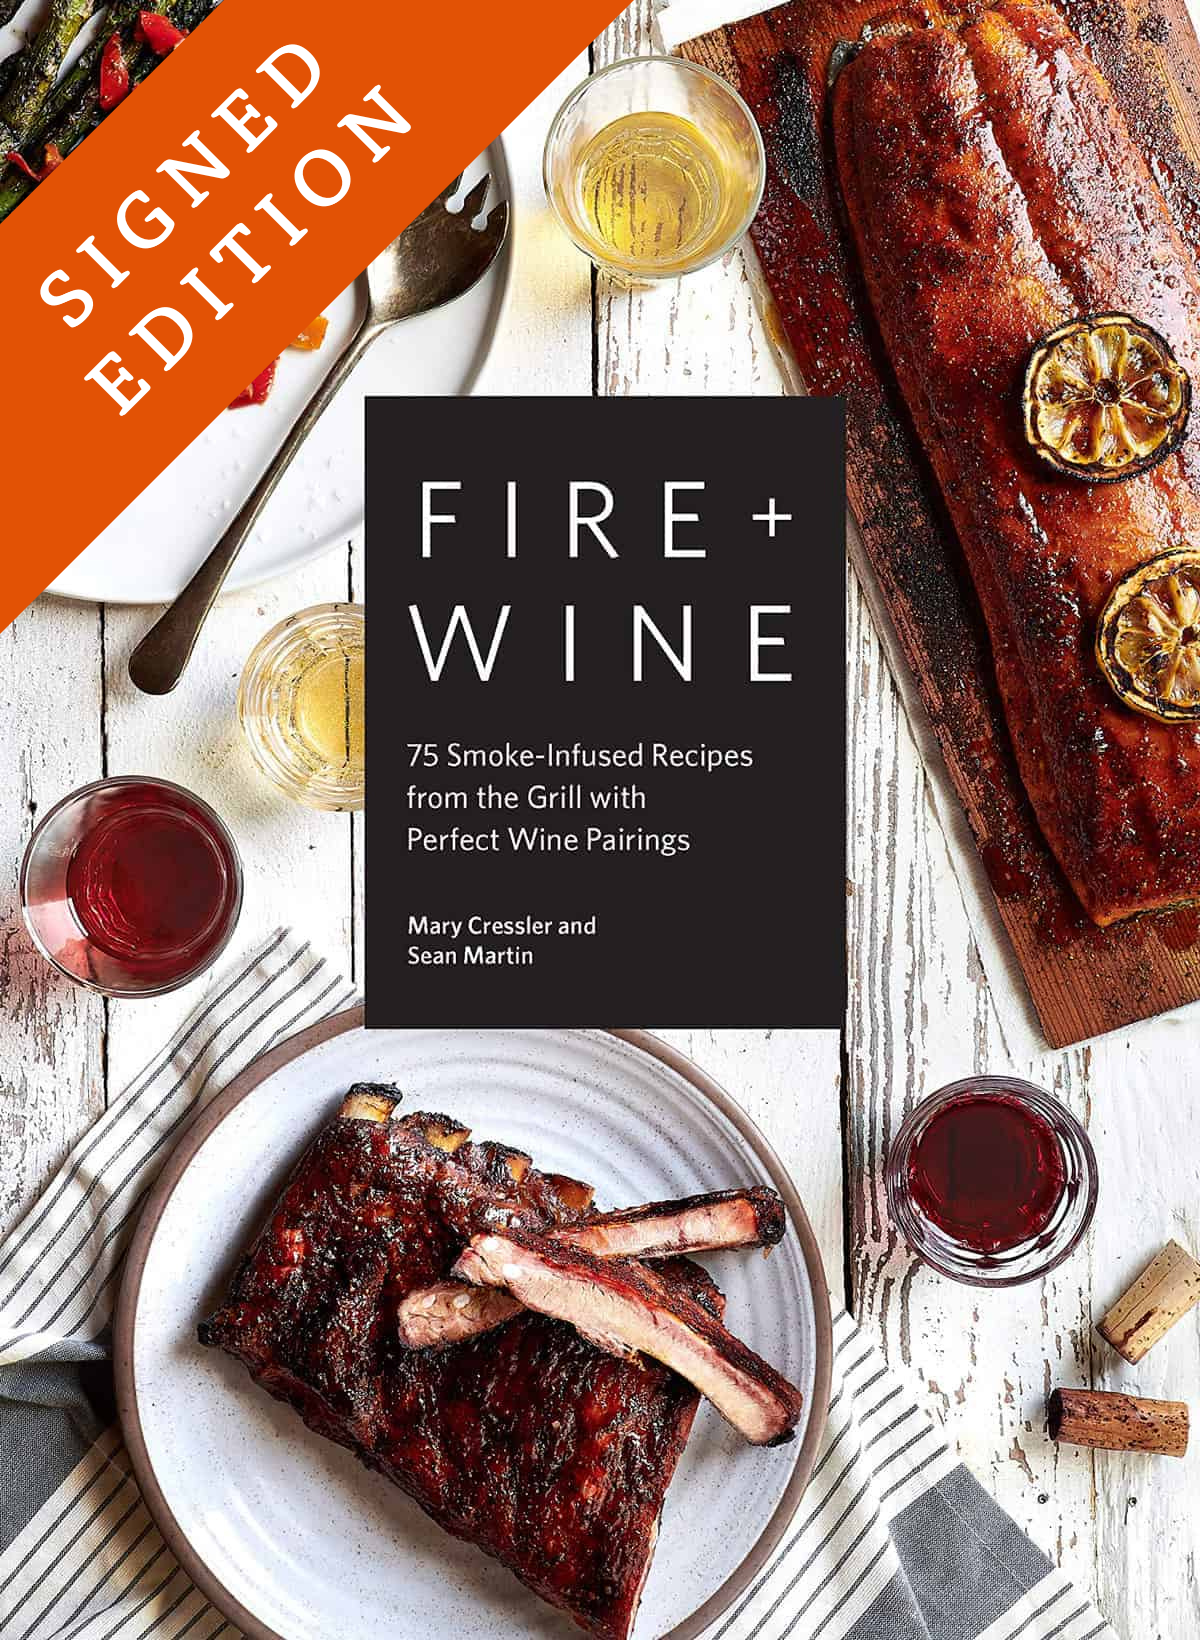 https://www.vindulge.com/wp-content/uploads/2022/08/Fire-and-Wine-Signed-Edition.png